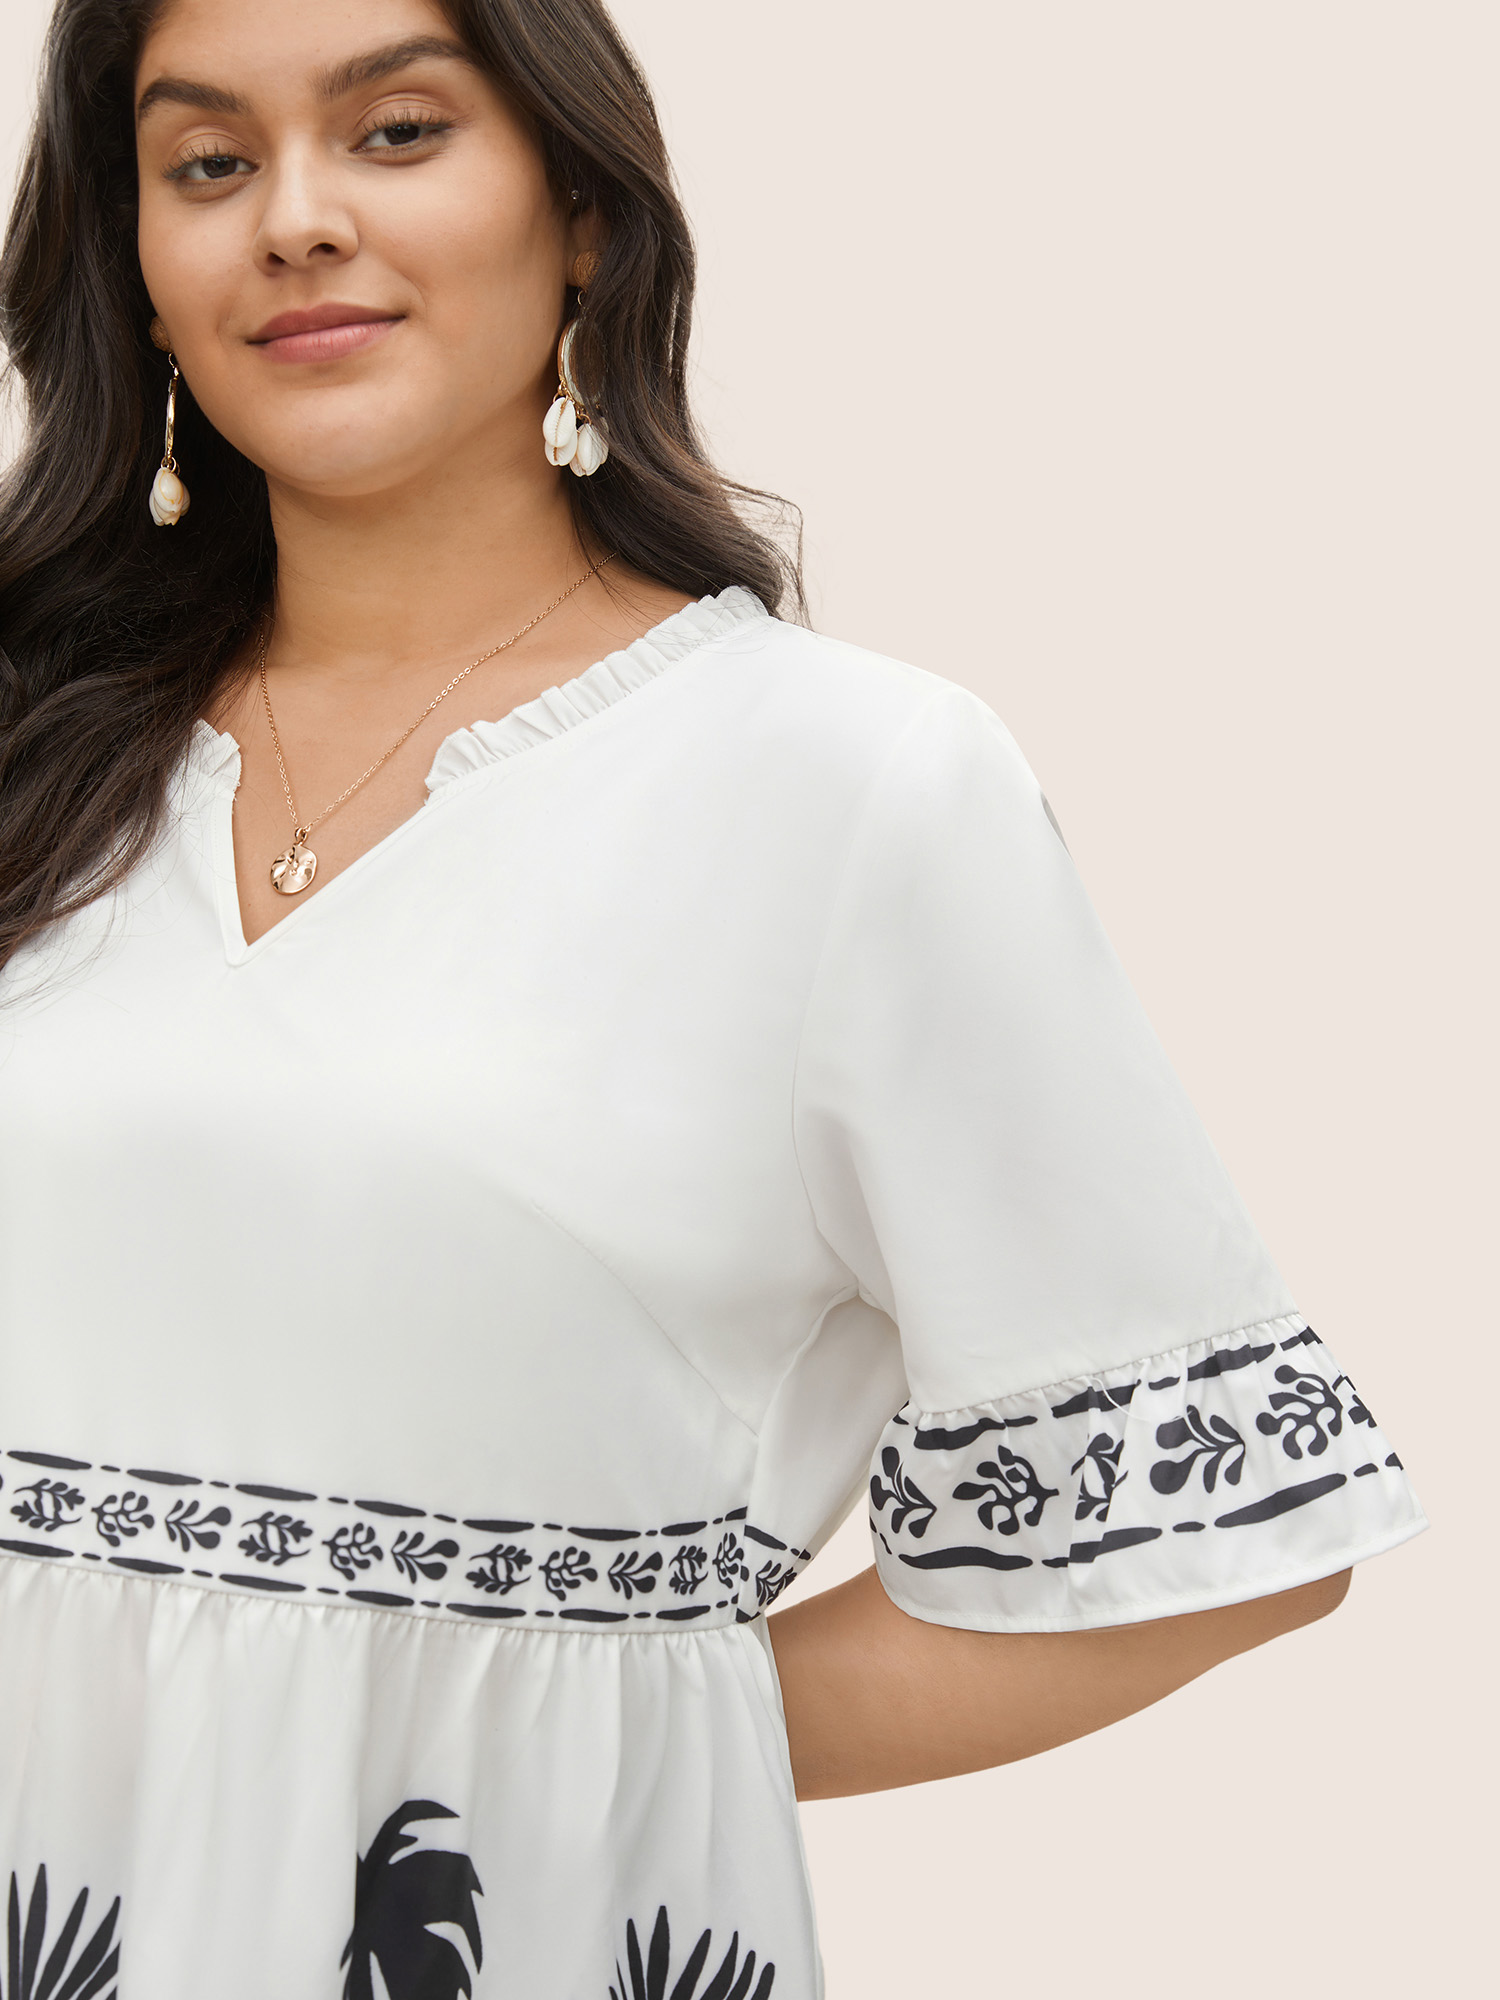 

Plus Size White Silhouette Floral Print Frill Trim Gathered Blouse Women Resort Half Sleeve V-neck Vacation Blouses BloomChic